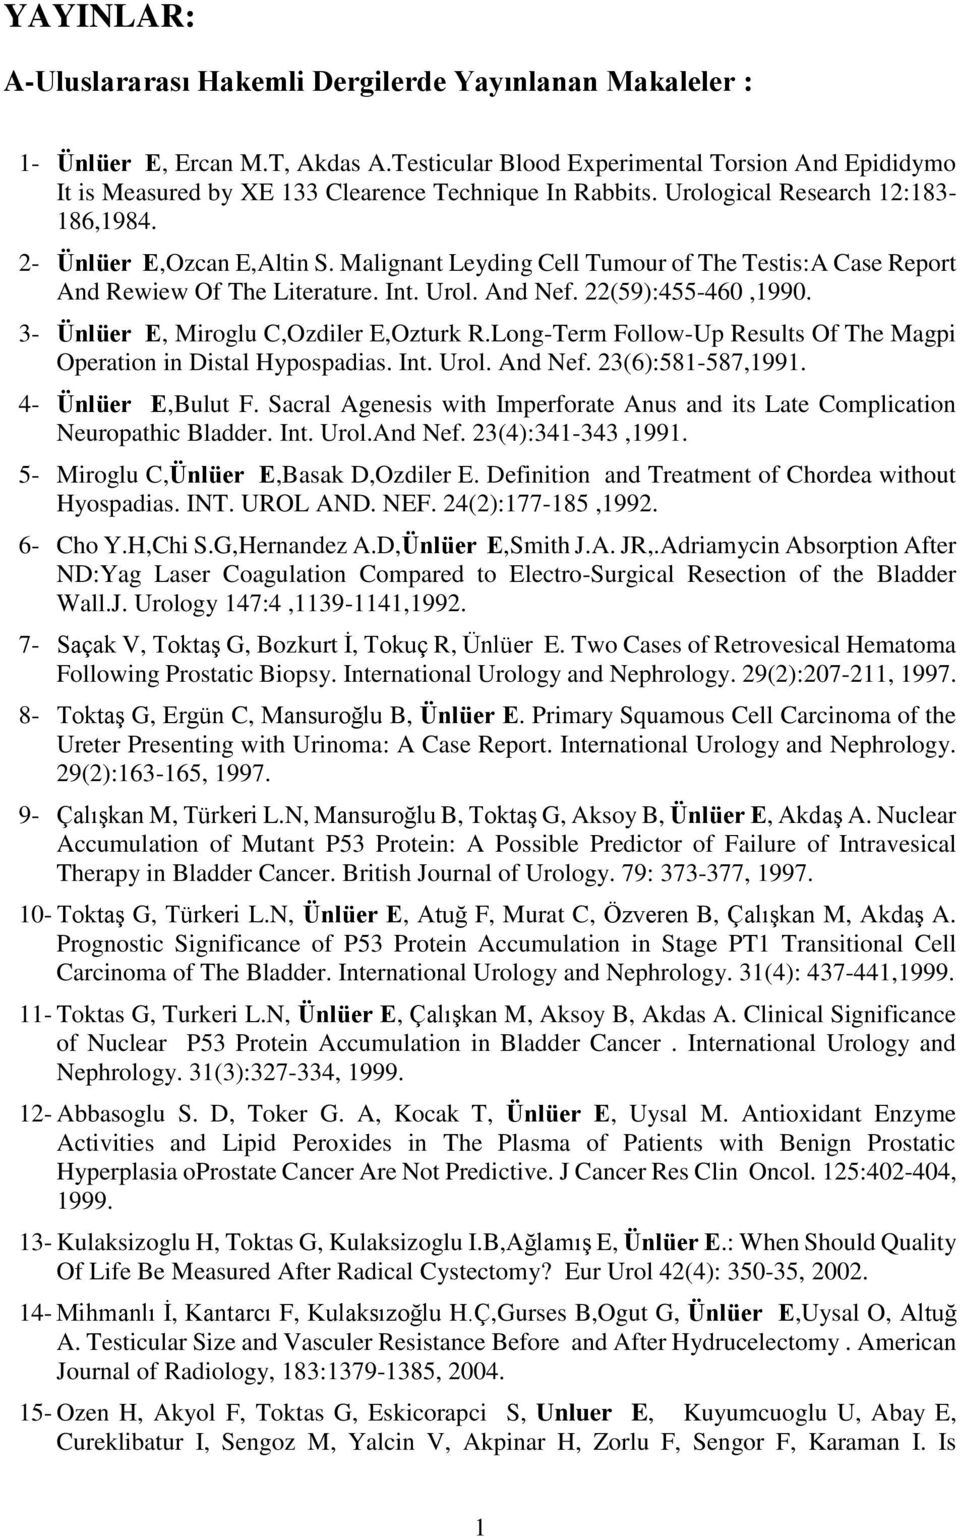 Malignant Leyding Cell Tumour of The Testis:A Case Report And Rewiew Of The Literature. Int. Urol. And Nef. 22(59):455-460,1990. 3- Ünlüer E, Miroglu C,Ozdiler E,Ozturk R.